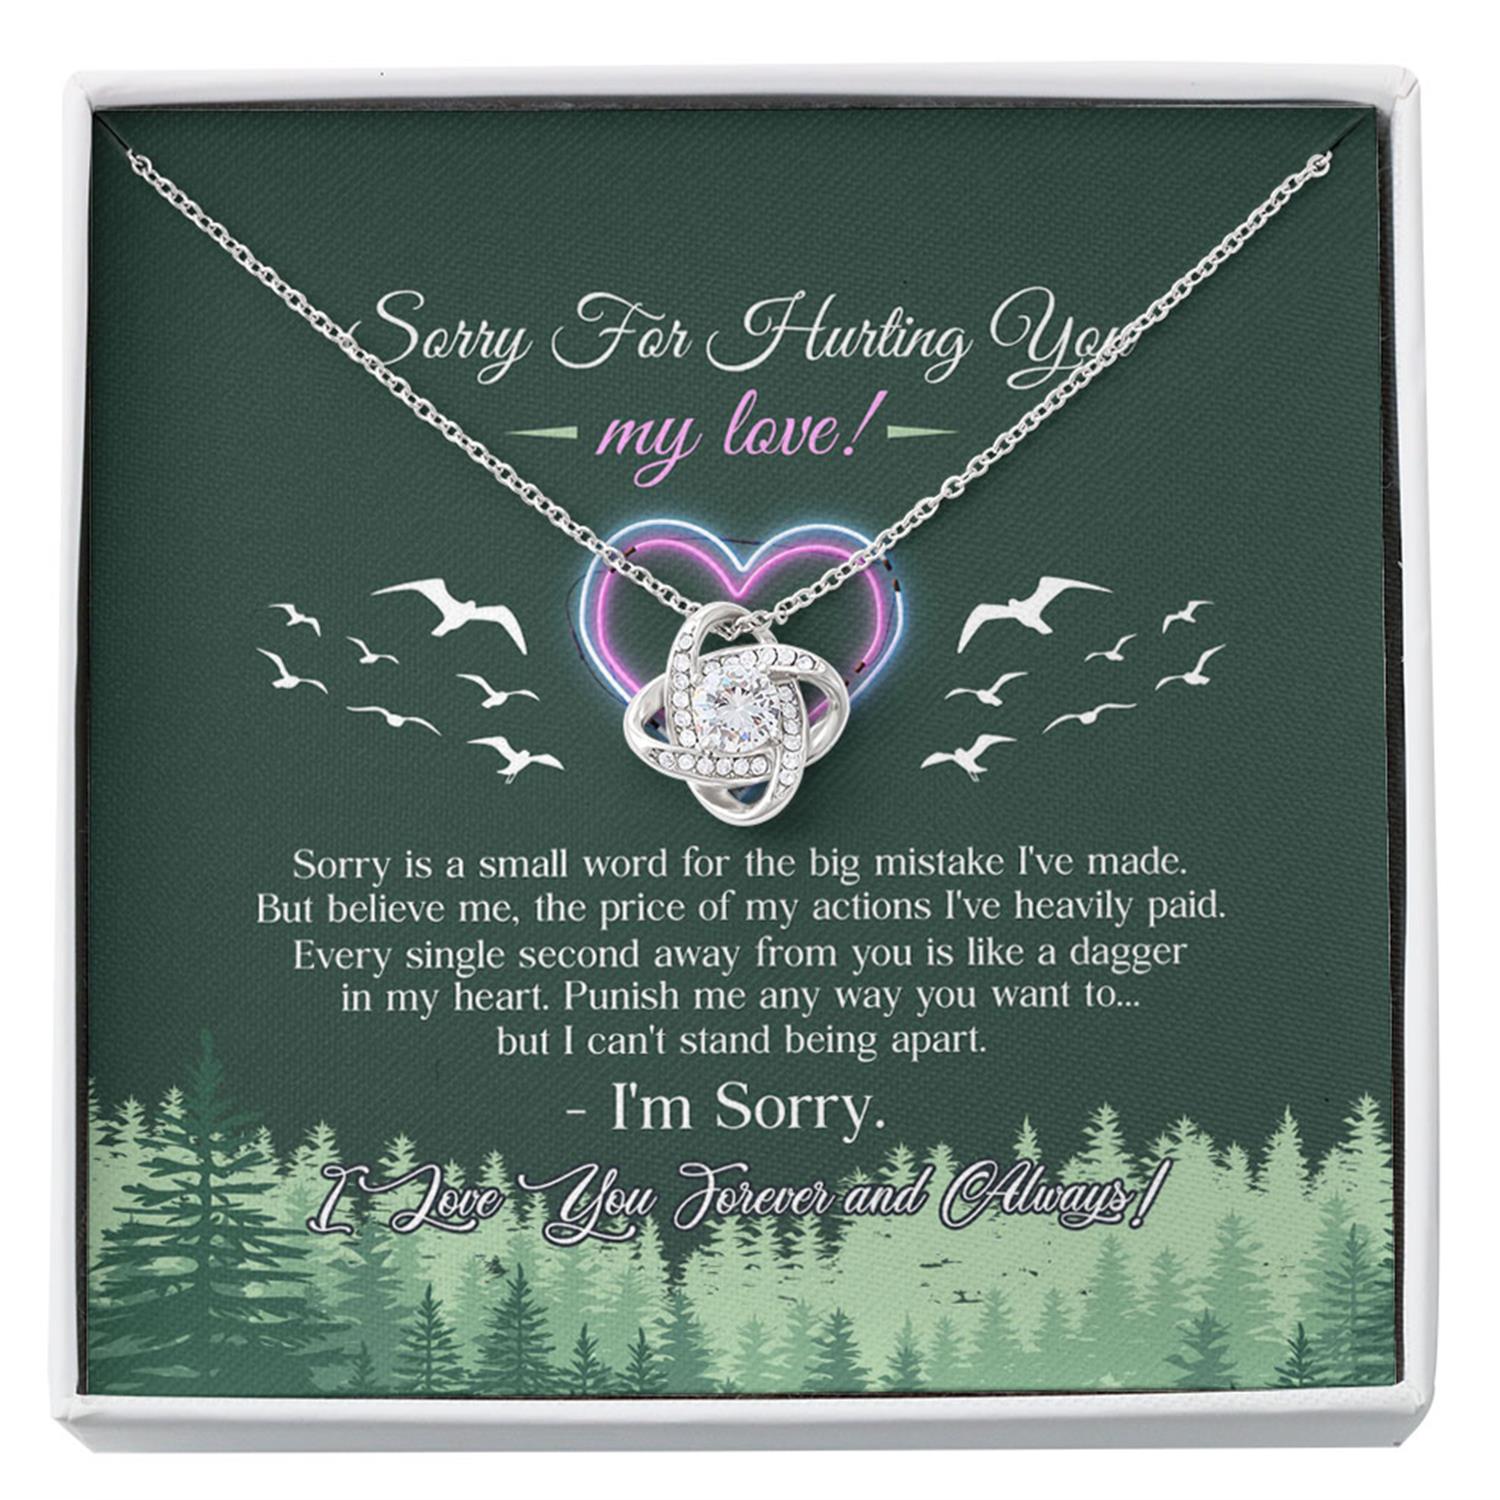 Girlfriend Necklace, Wife Necklace, Apology Necklace Gift To Say Sorry, Gift To Apologize, Gifts For Apology, I'm Sorry Gift For Her Custom Necklace